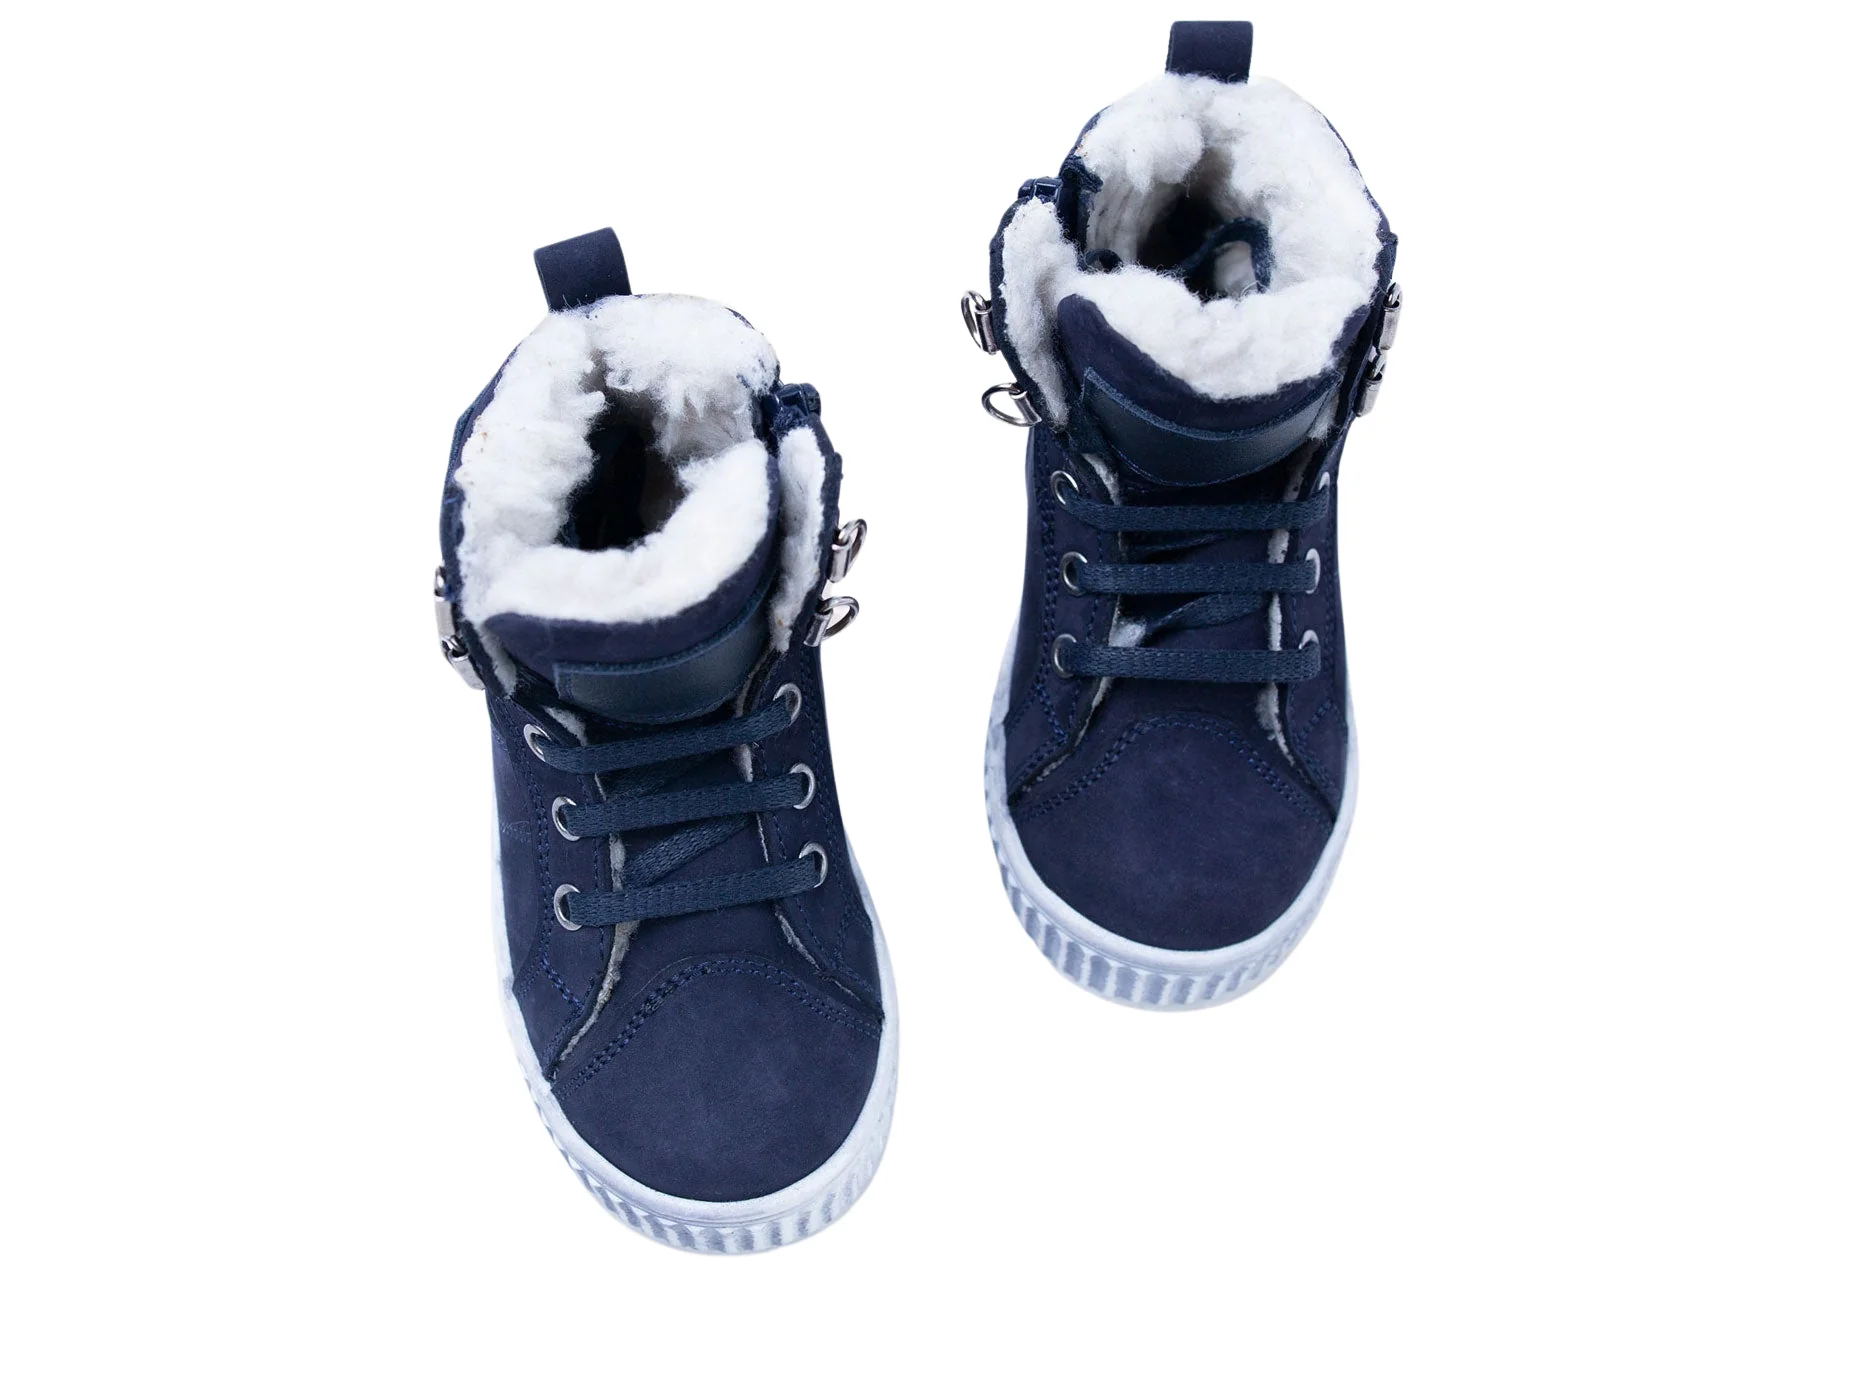 a pair of blue shoes with a fur lined top